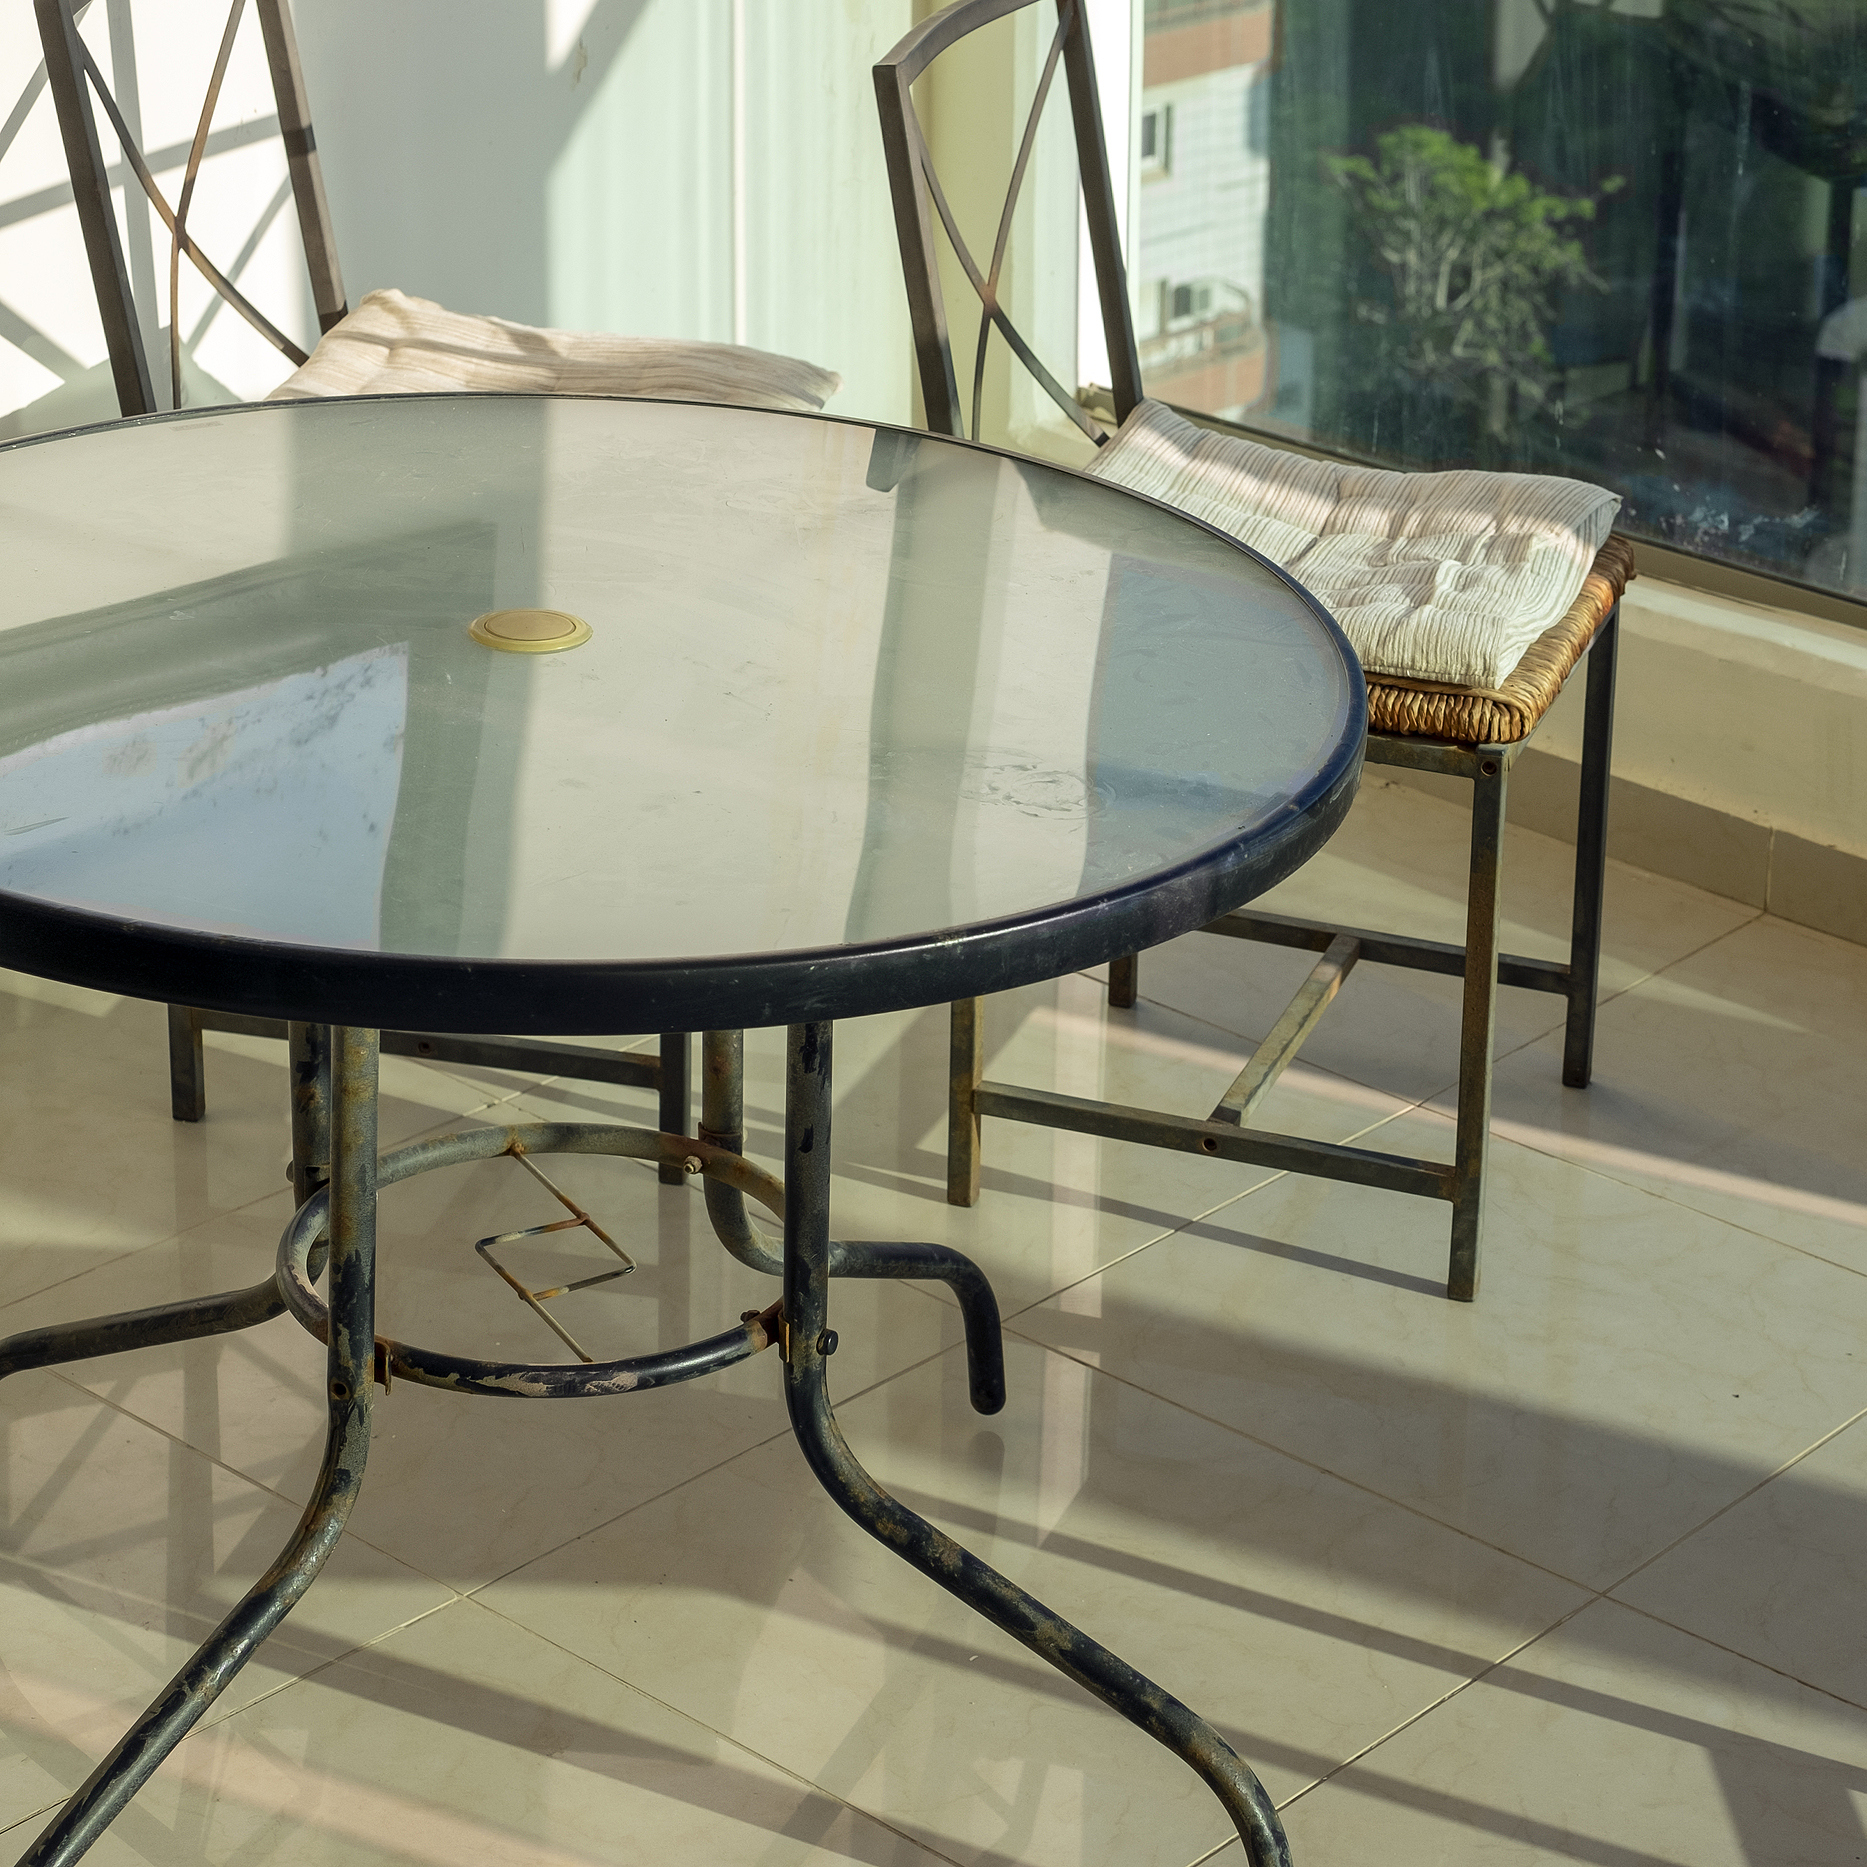 The Best Way to Ship Glass Tables: 5 Expert Tips to Take